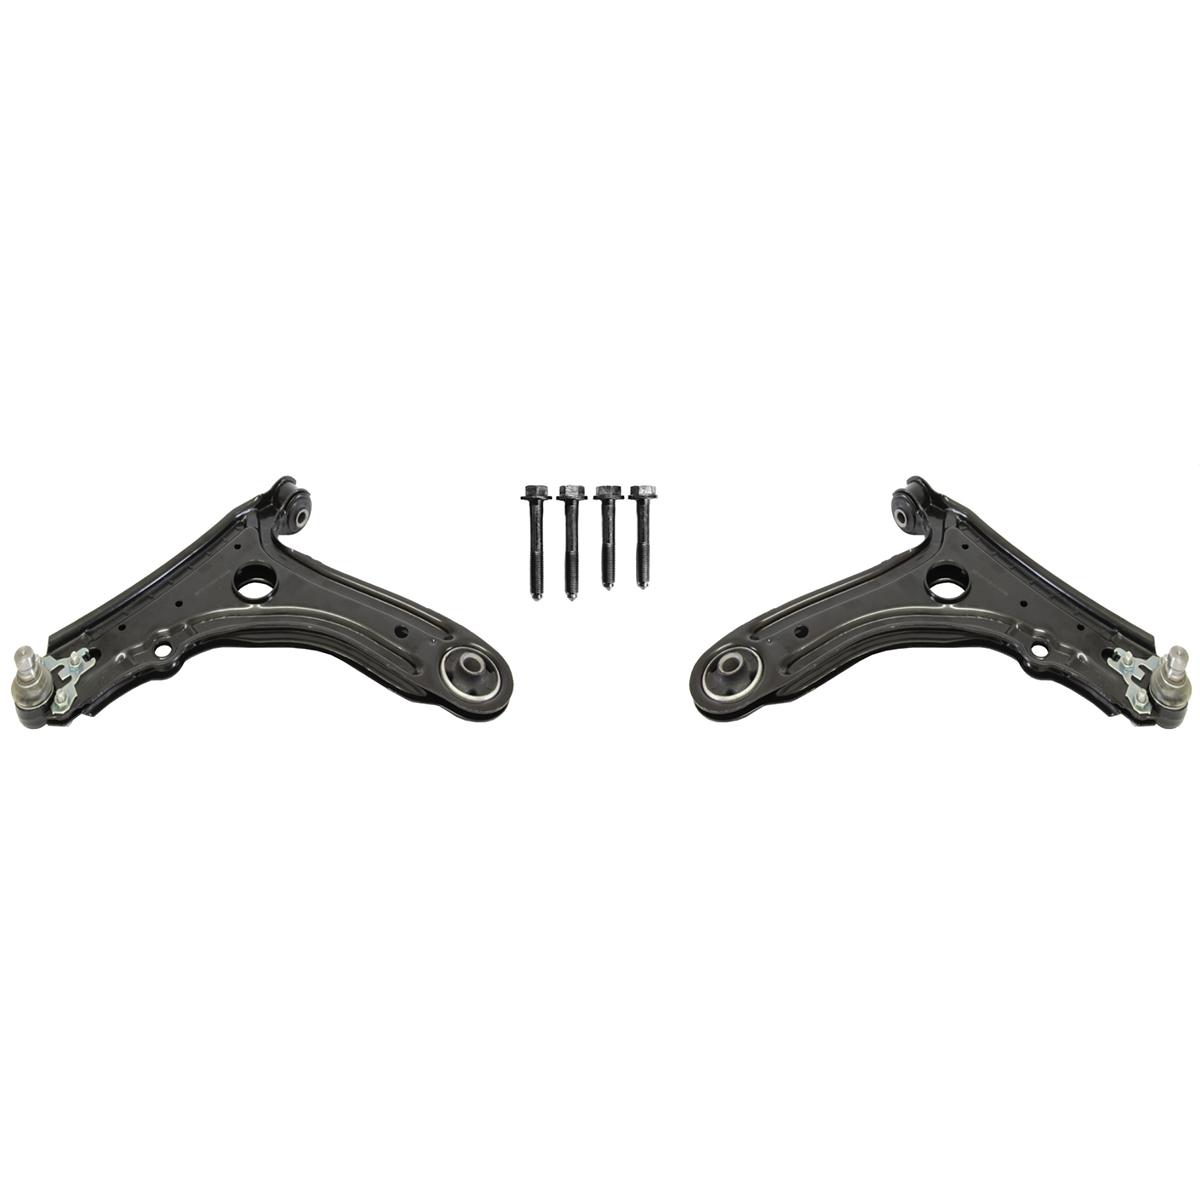 Wishbone set including reinforced Coupling Bars / Steering Rods VW Golf Mk2 Jetta 2 Year of Manufacturing up to 07/1987